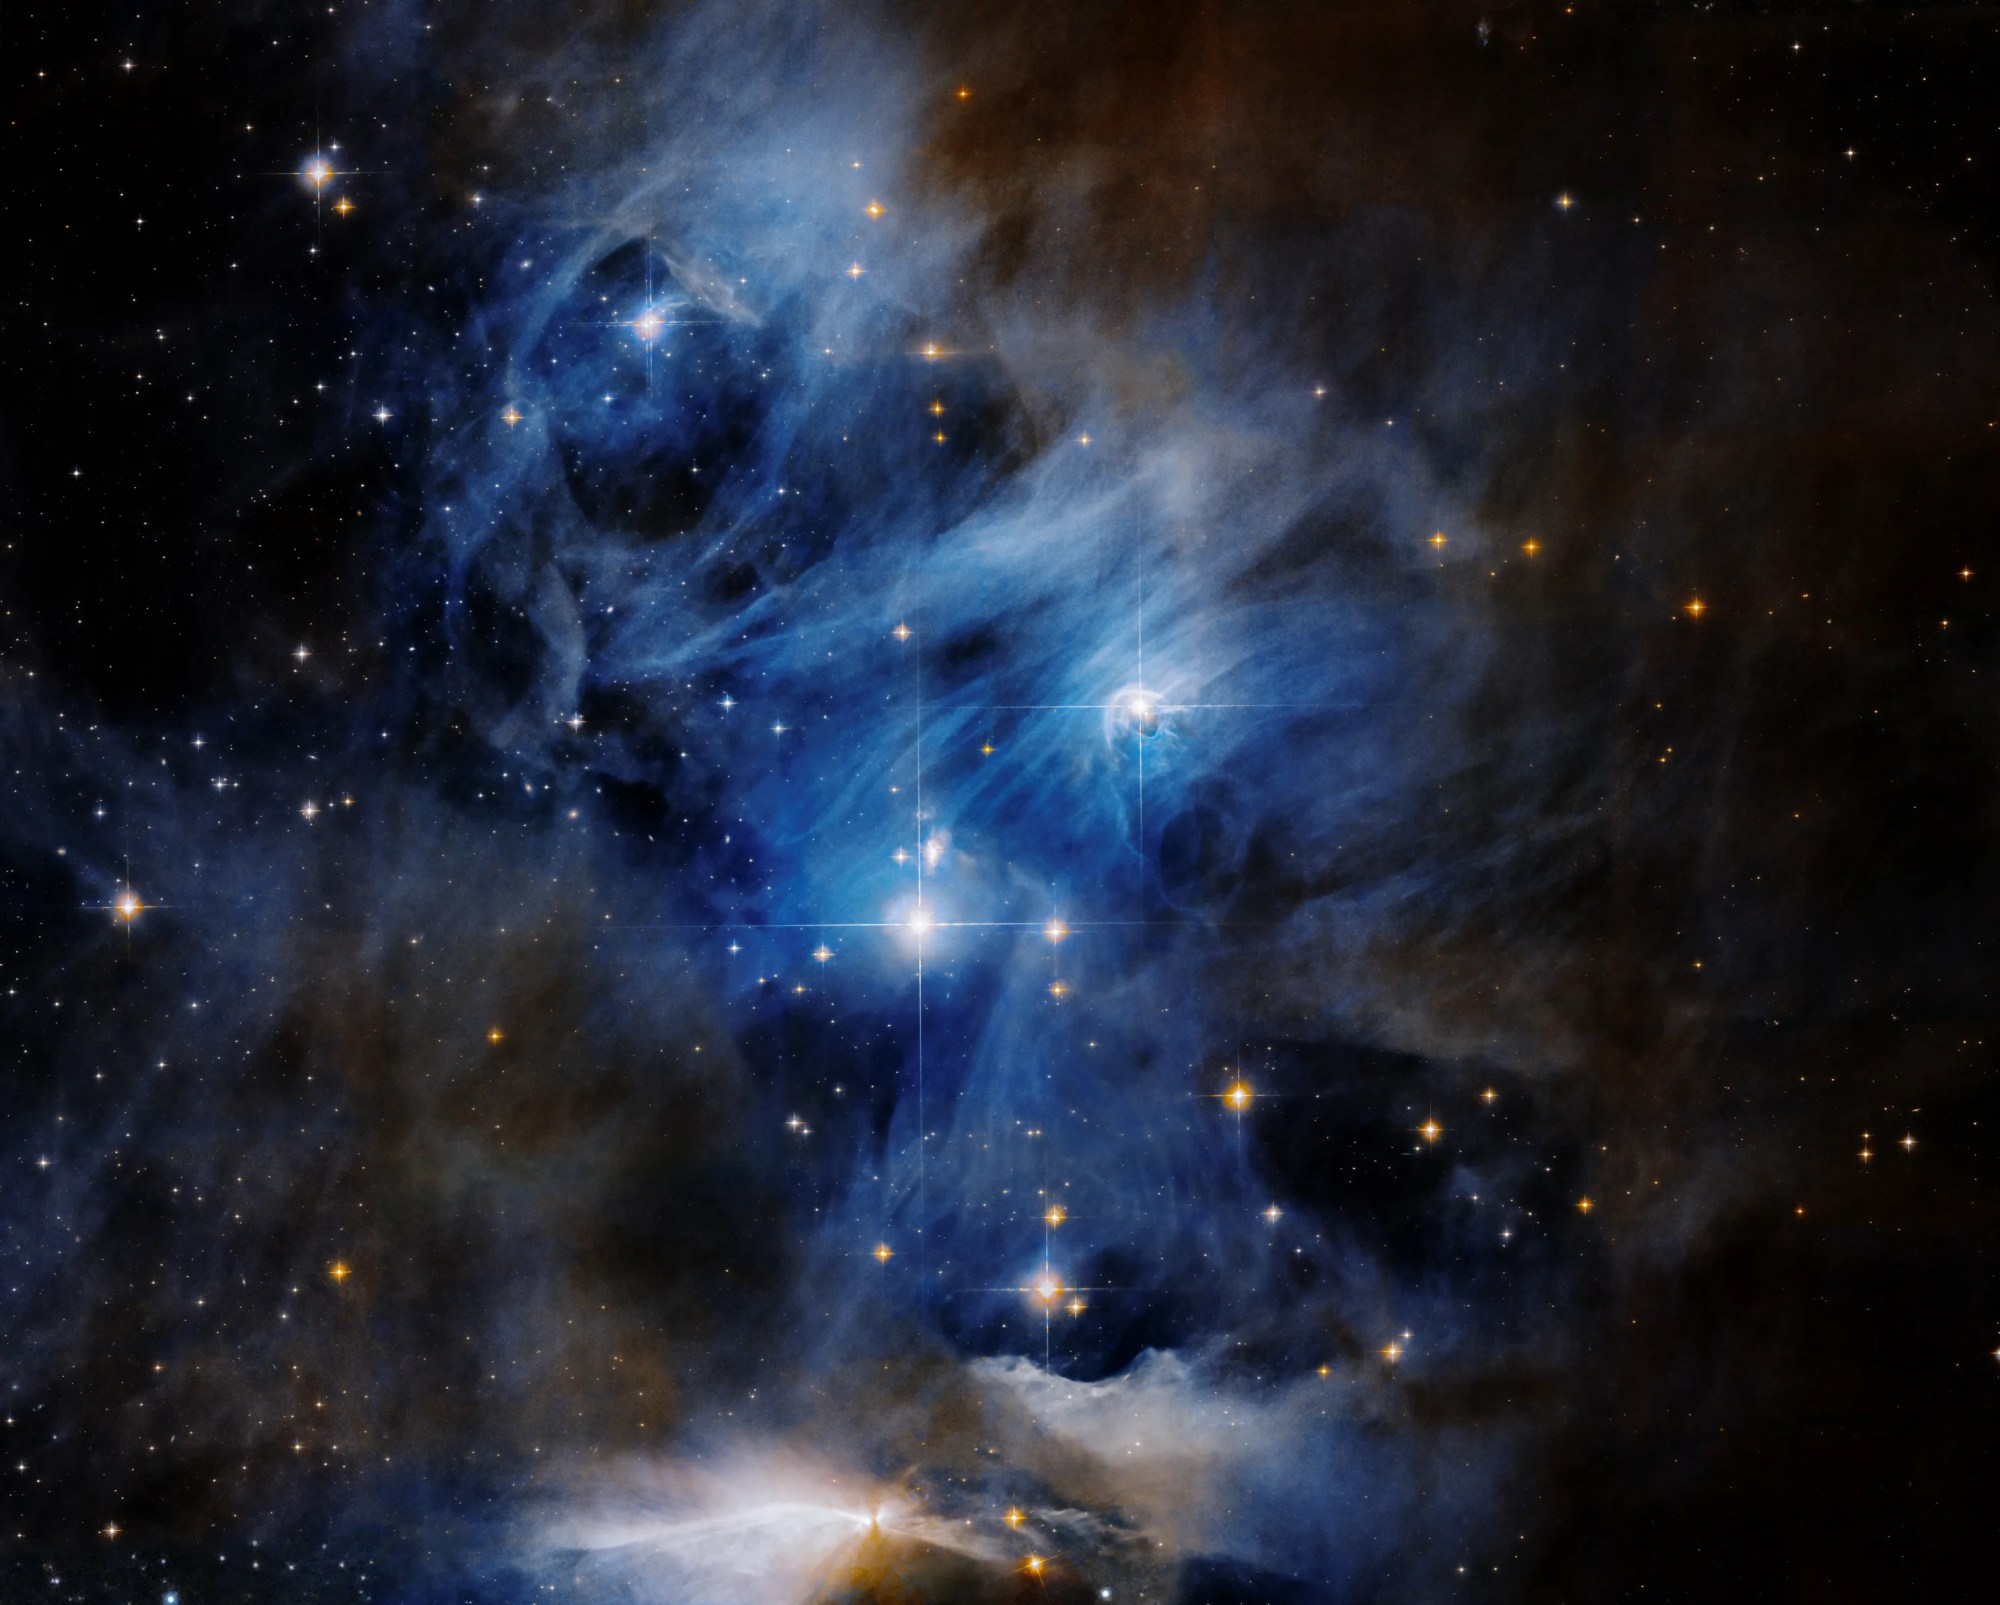 Bright blue and white nebula with bright young blue stars dotted through the image. bottom center: herbig-haro object, bright white clouds extend left and right, center point is white with rusty margins